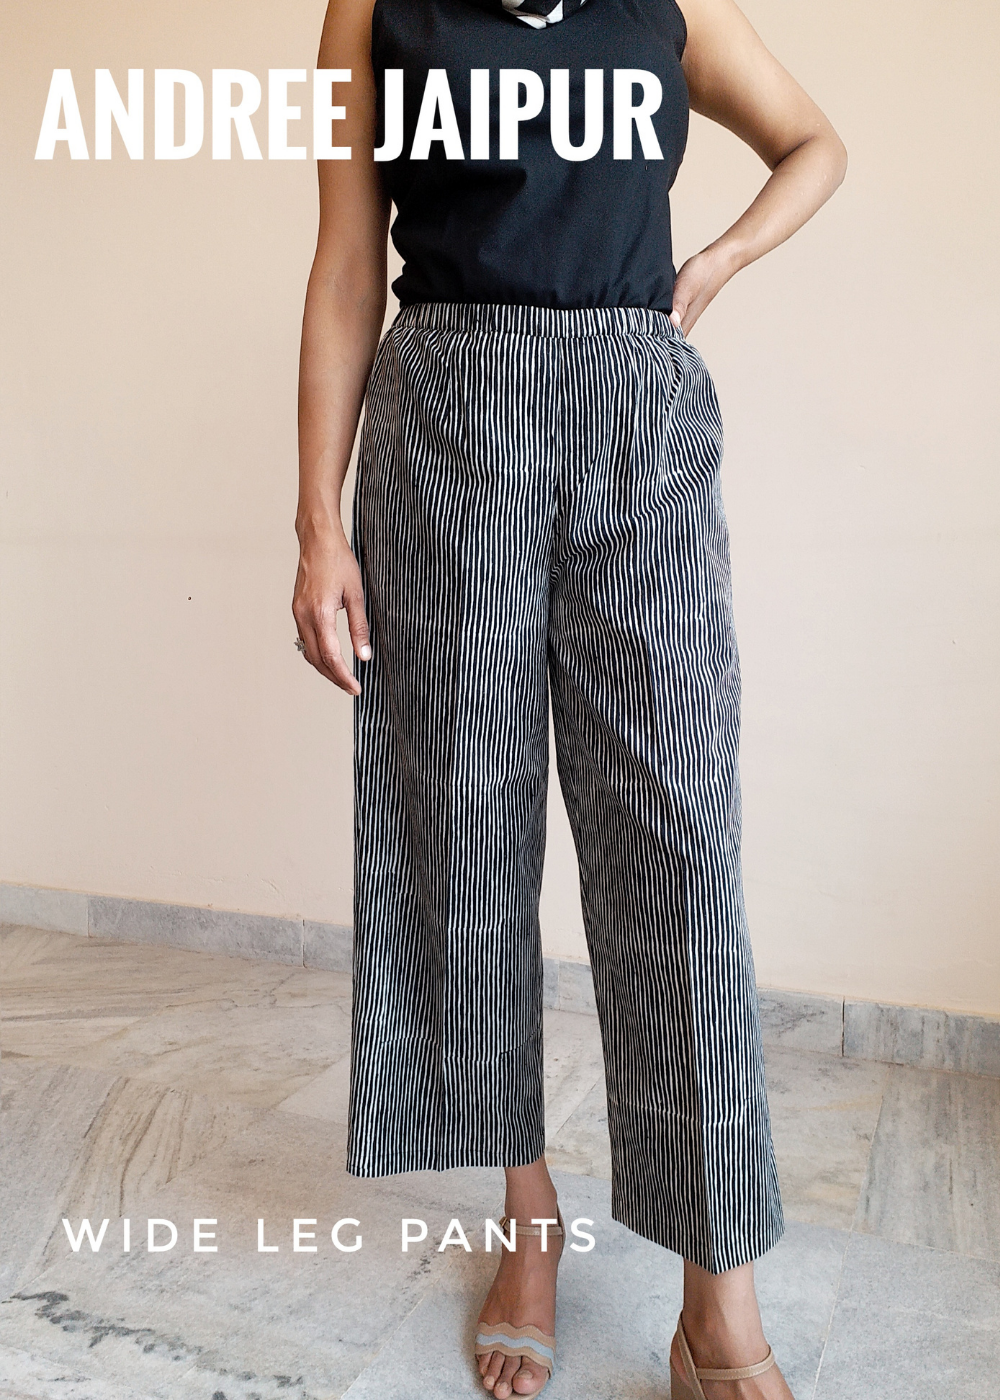 Matchstick pant with cinched waist and wide leg shown with black tank top.